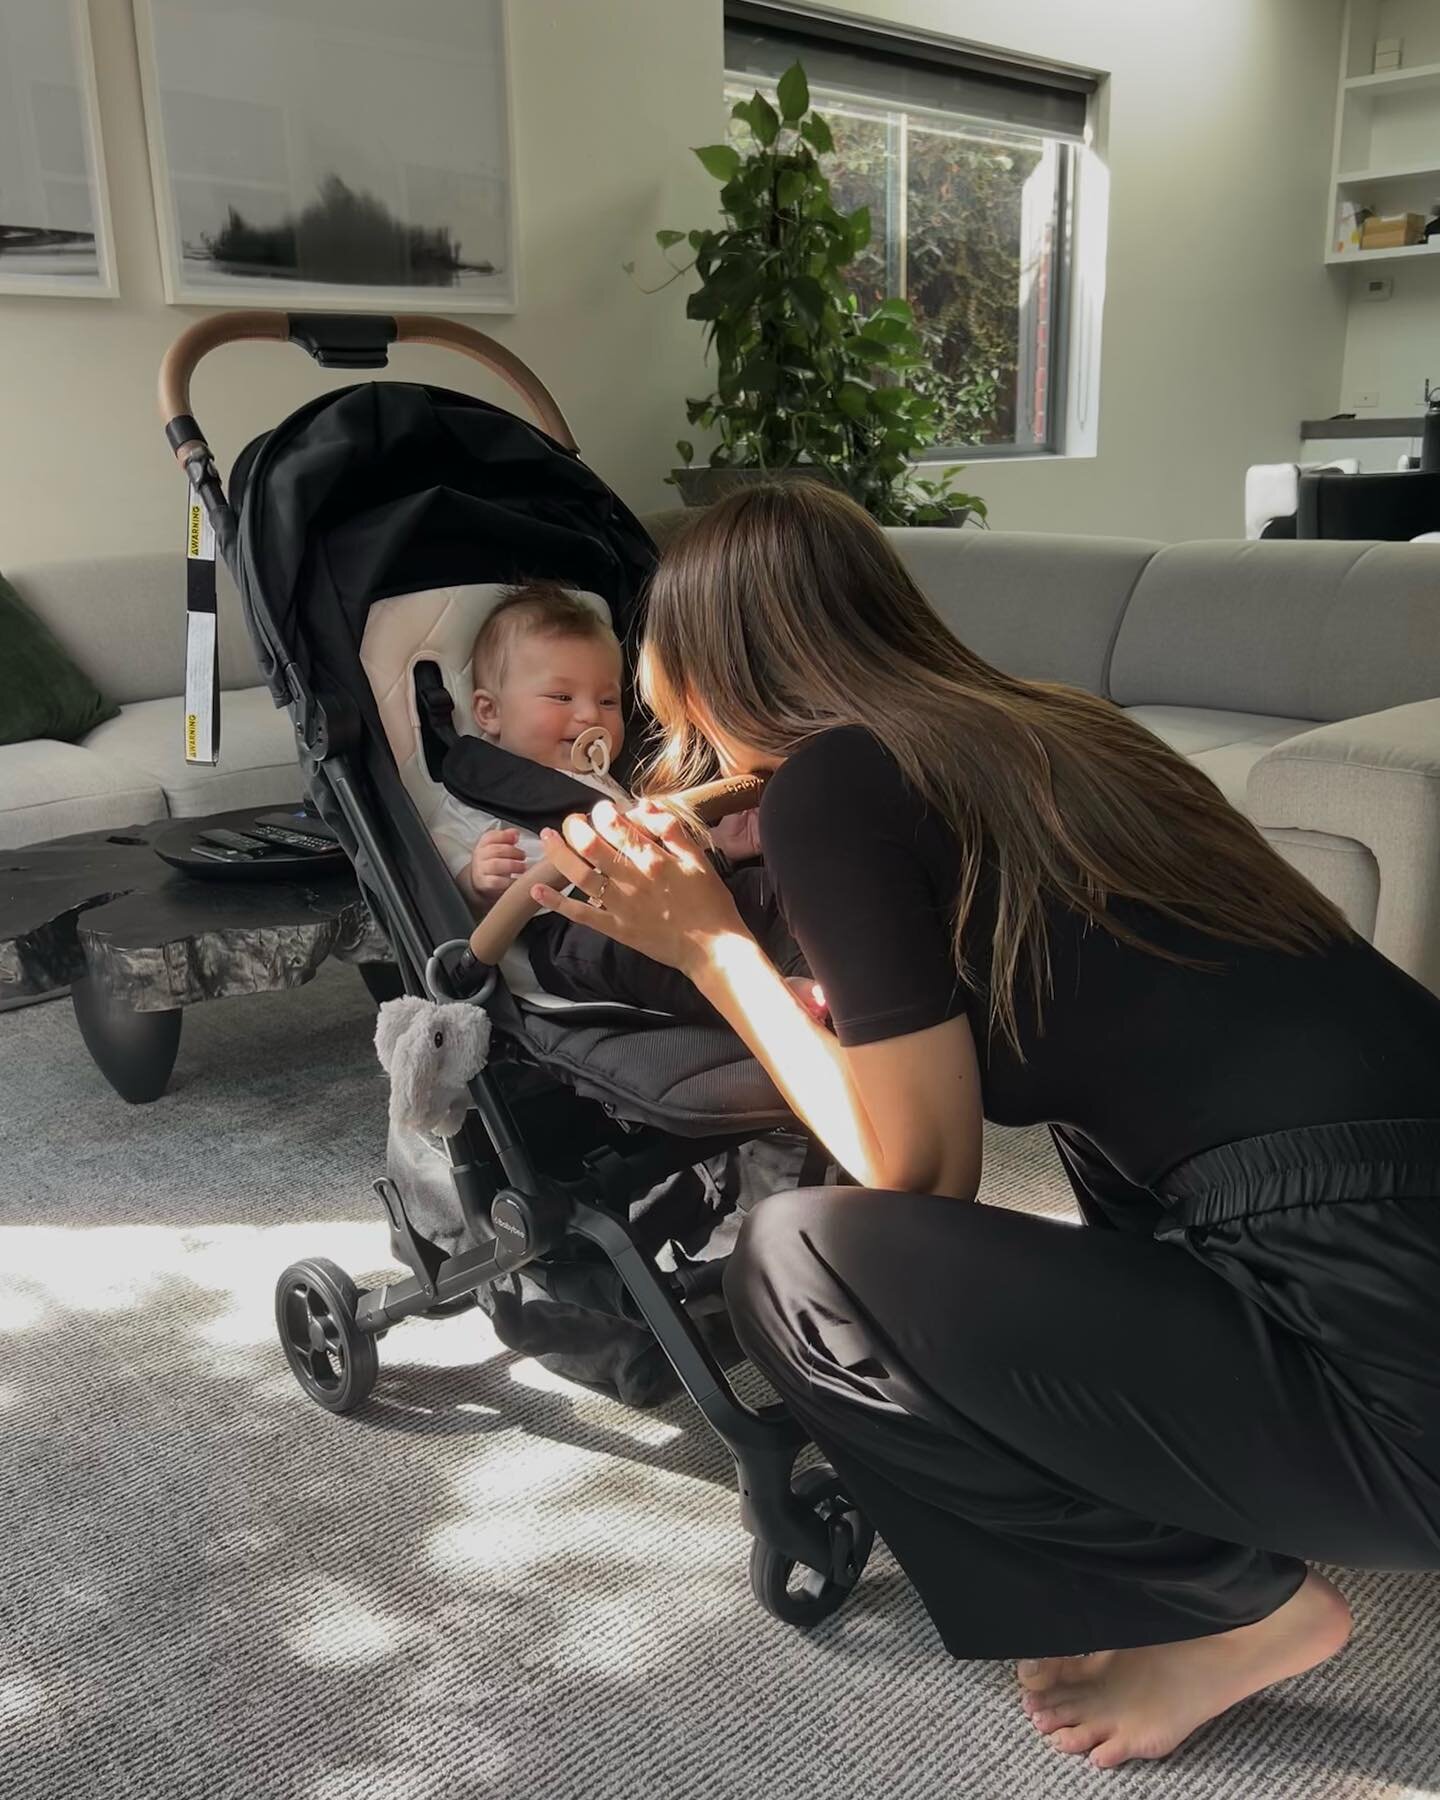 Introducing some new additions to our 5 month old. Babybee have a great range of products to carry you through from newborn to toddler. We are heading to Singapore very soon and wanted to opt for a lightweight travel pram. The Miles Pram weighs under